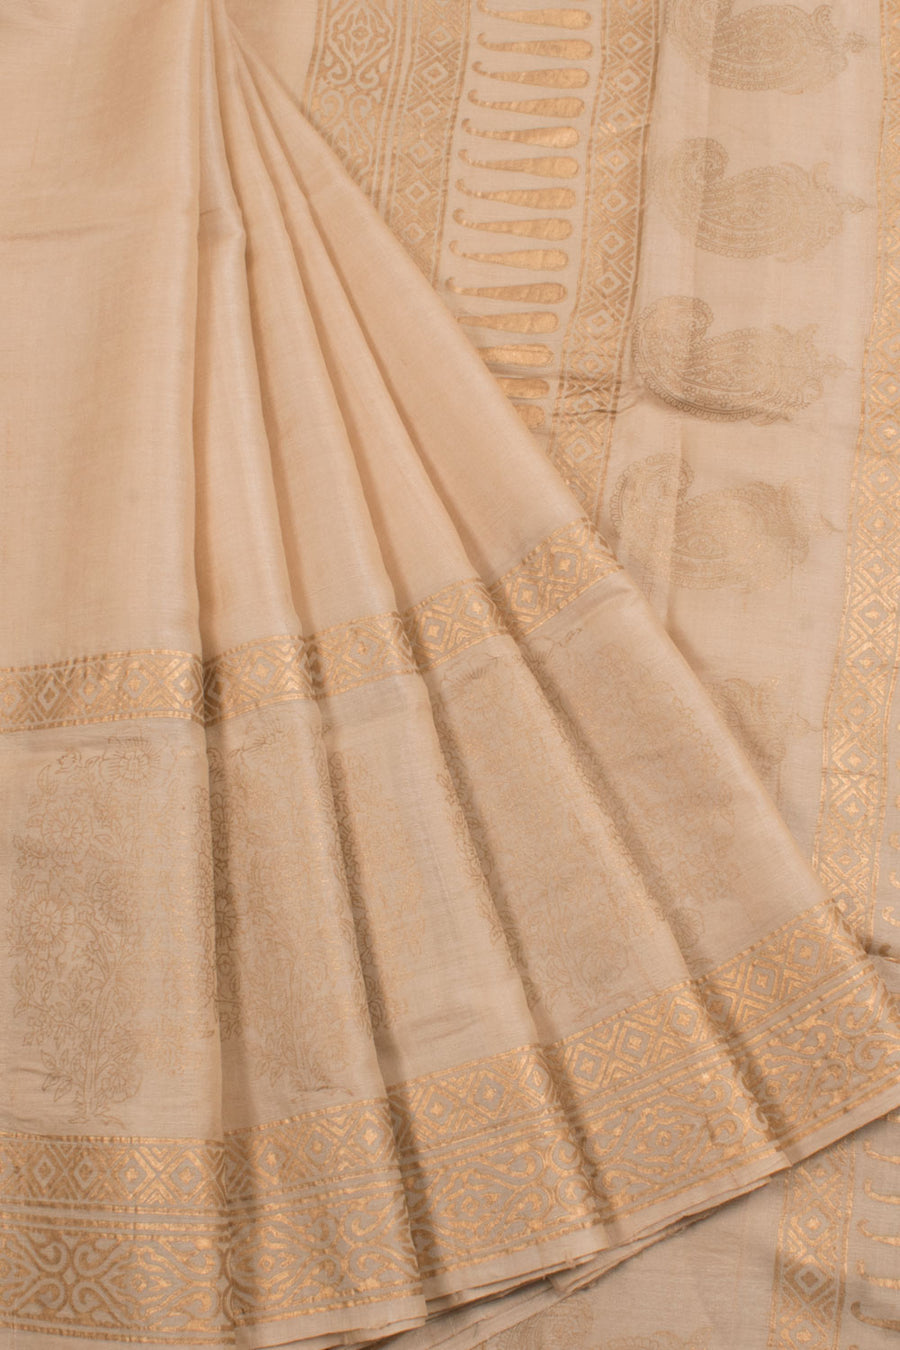 Hand Block Printed Tussar Silk Saree with Floral Motifs Border and Fancy Tassels